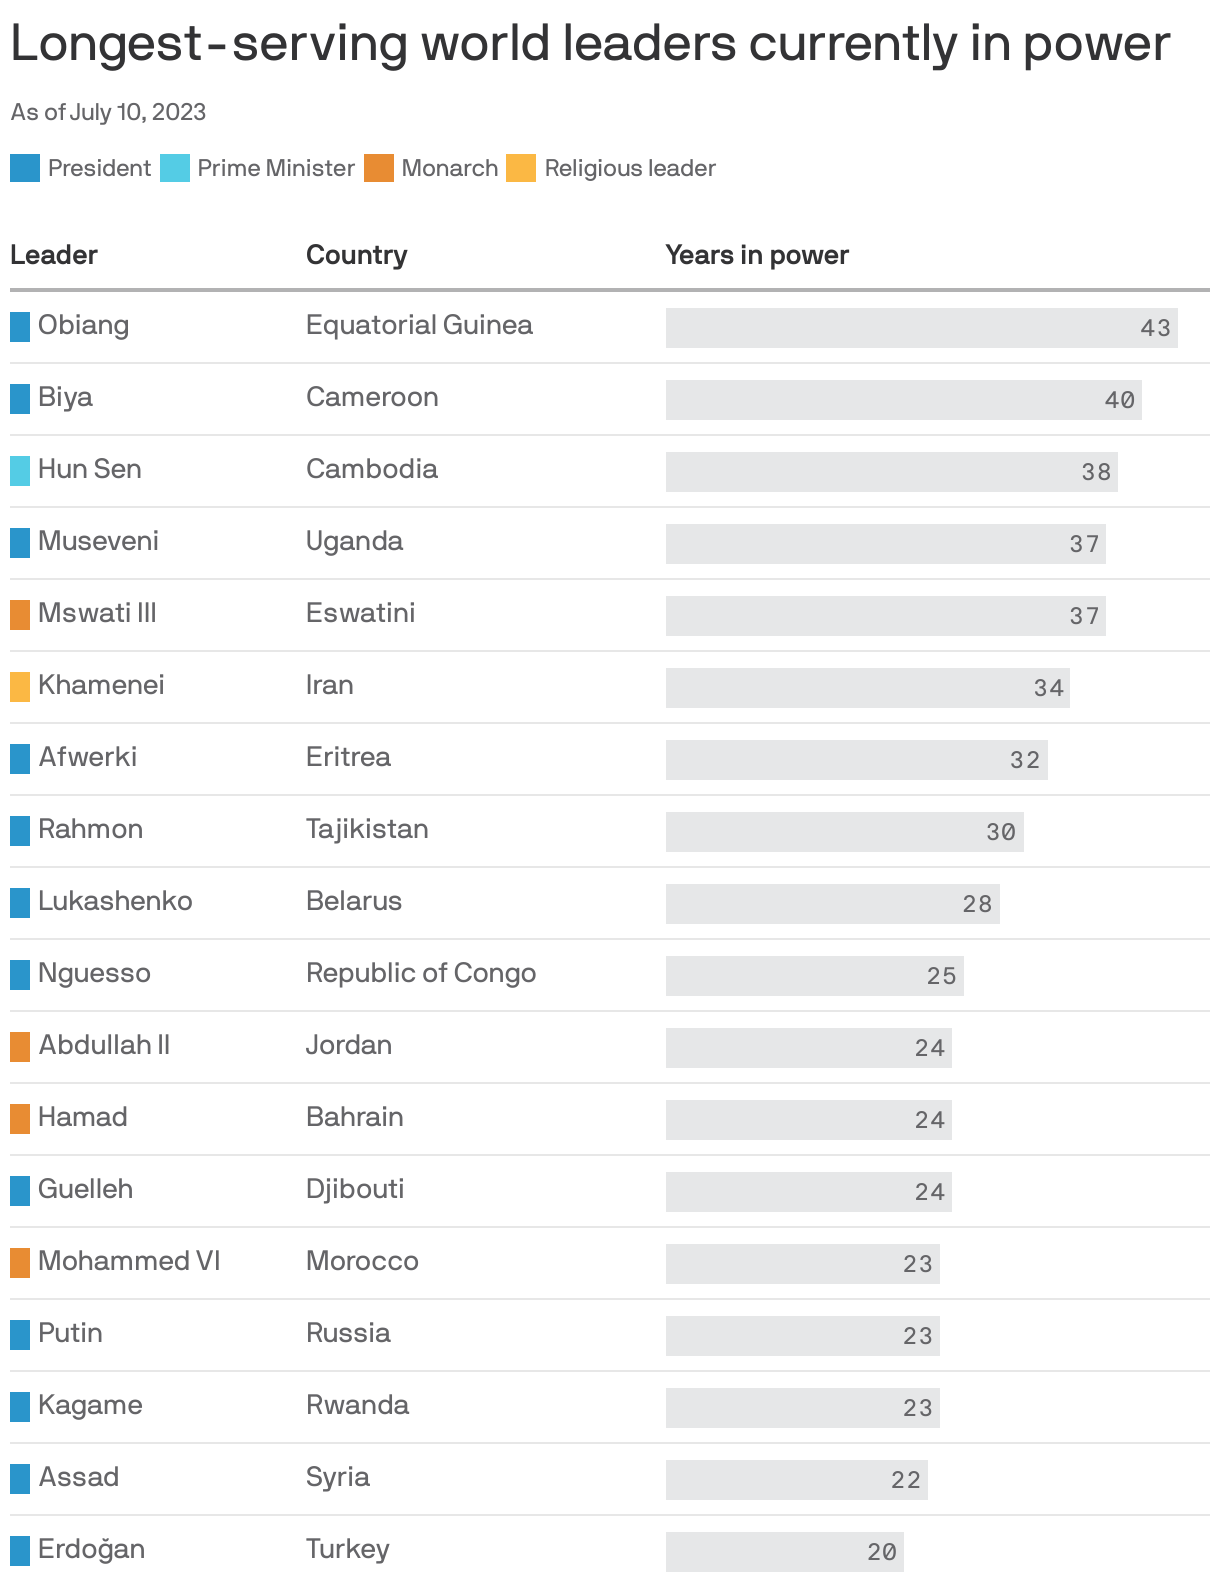 Longest-serving world leaders currently in power